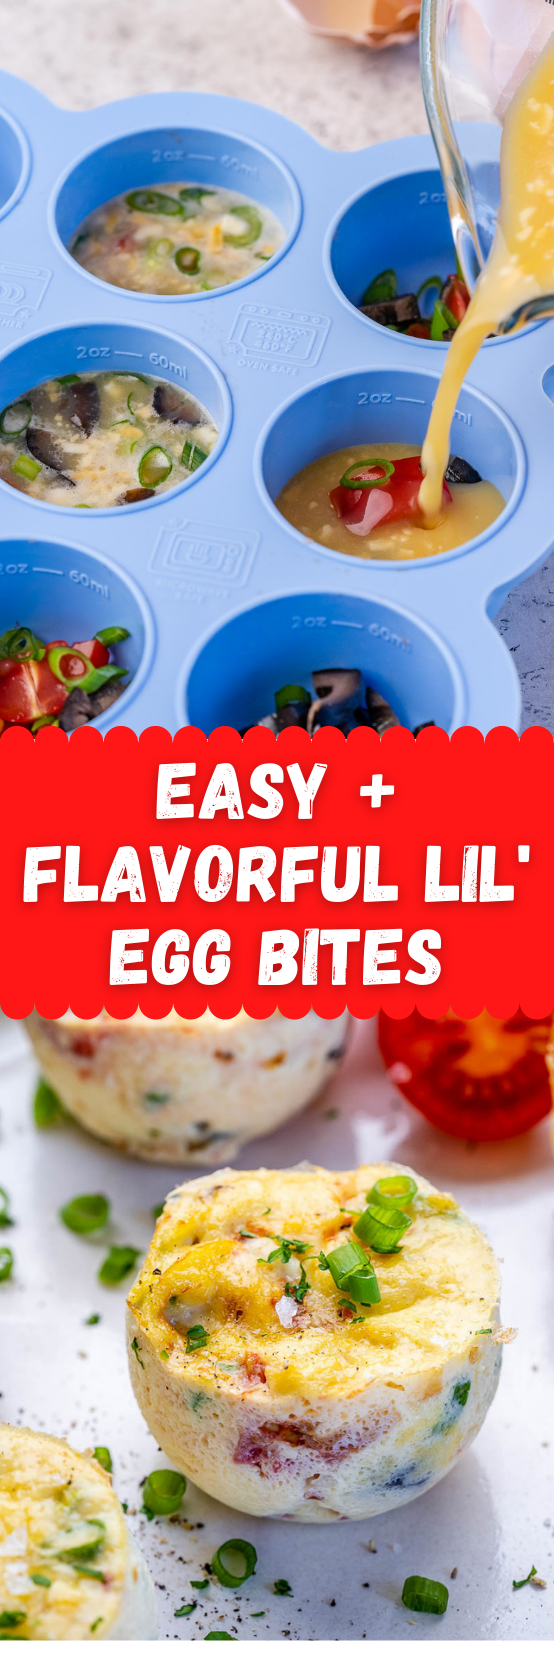 https://cleanfoodcrush.com/wp-content/uploads/2021/11/cfc-Easy-Flavorful-Lil-Egg-Bites-recipe.png